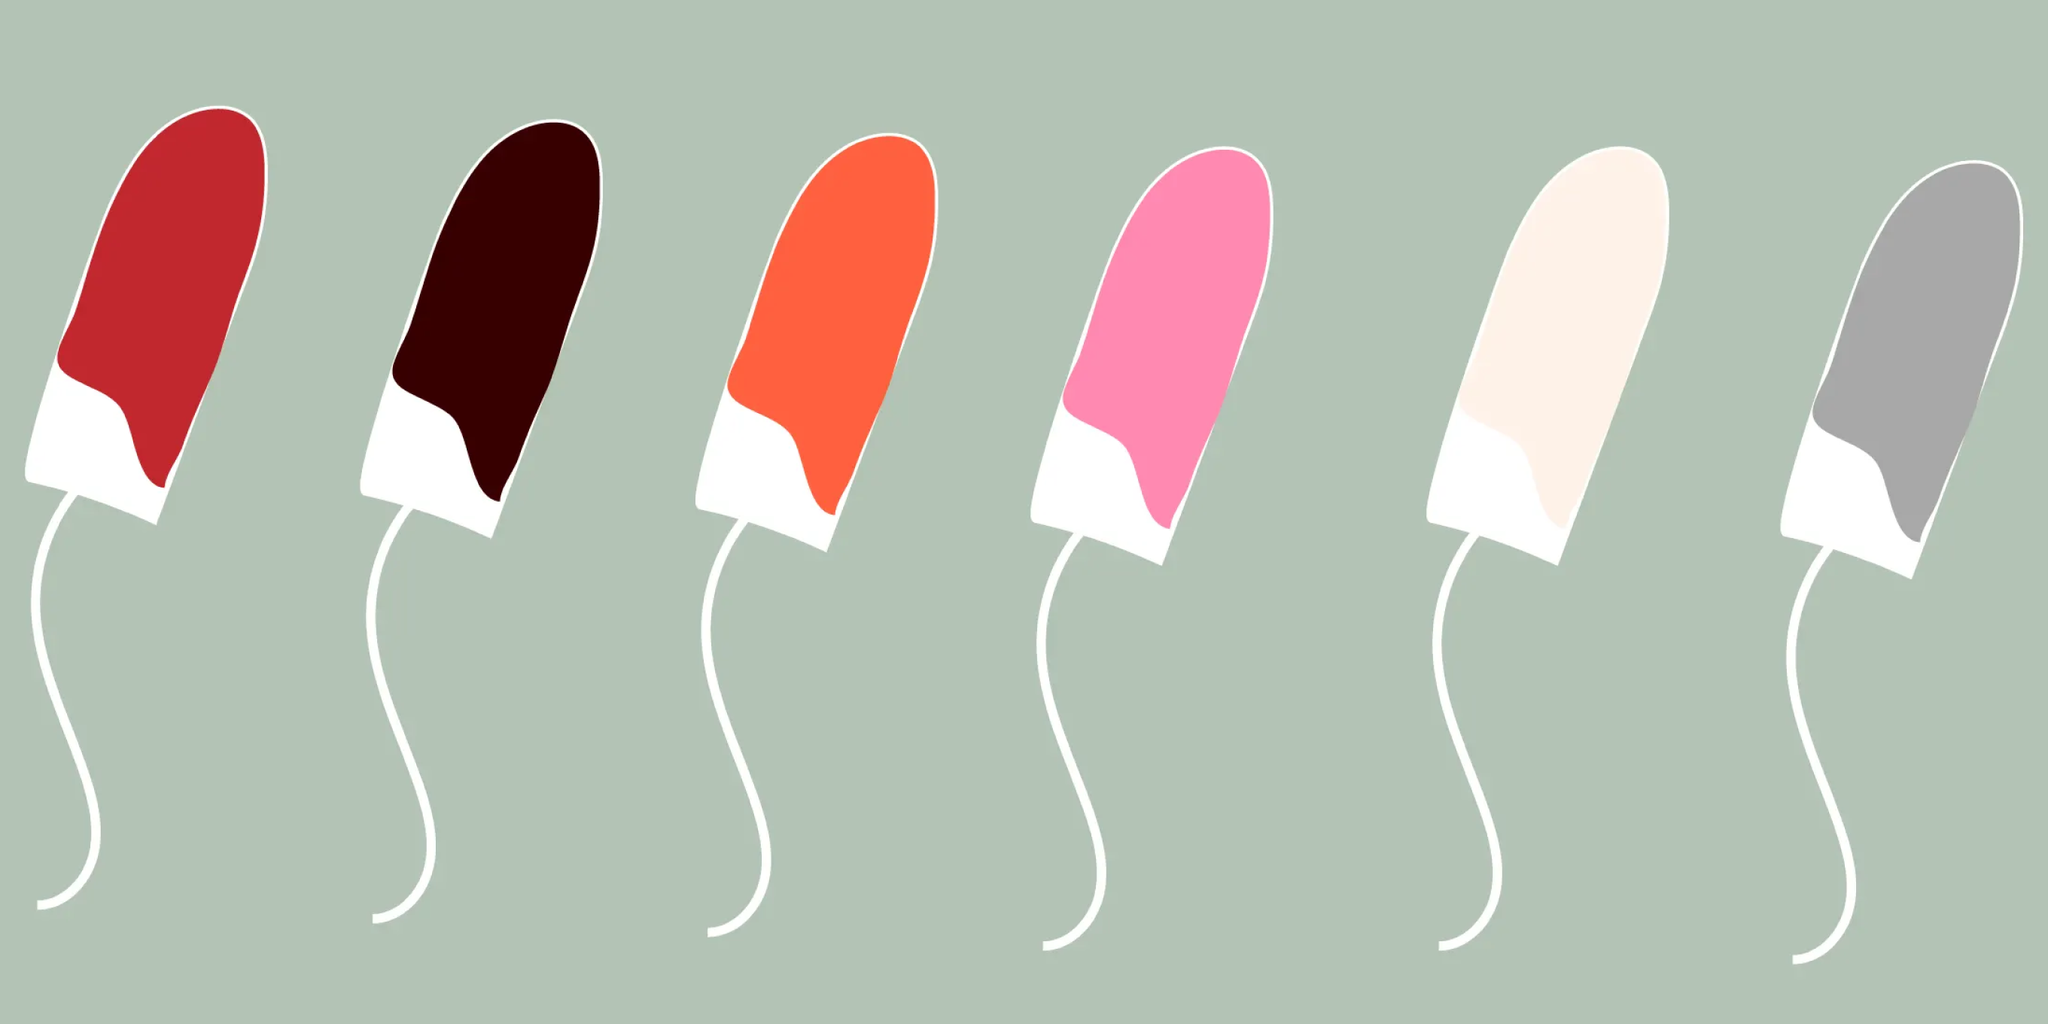 Animated diagram showing six different disposable tampons with different colours representing period blood